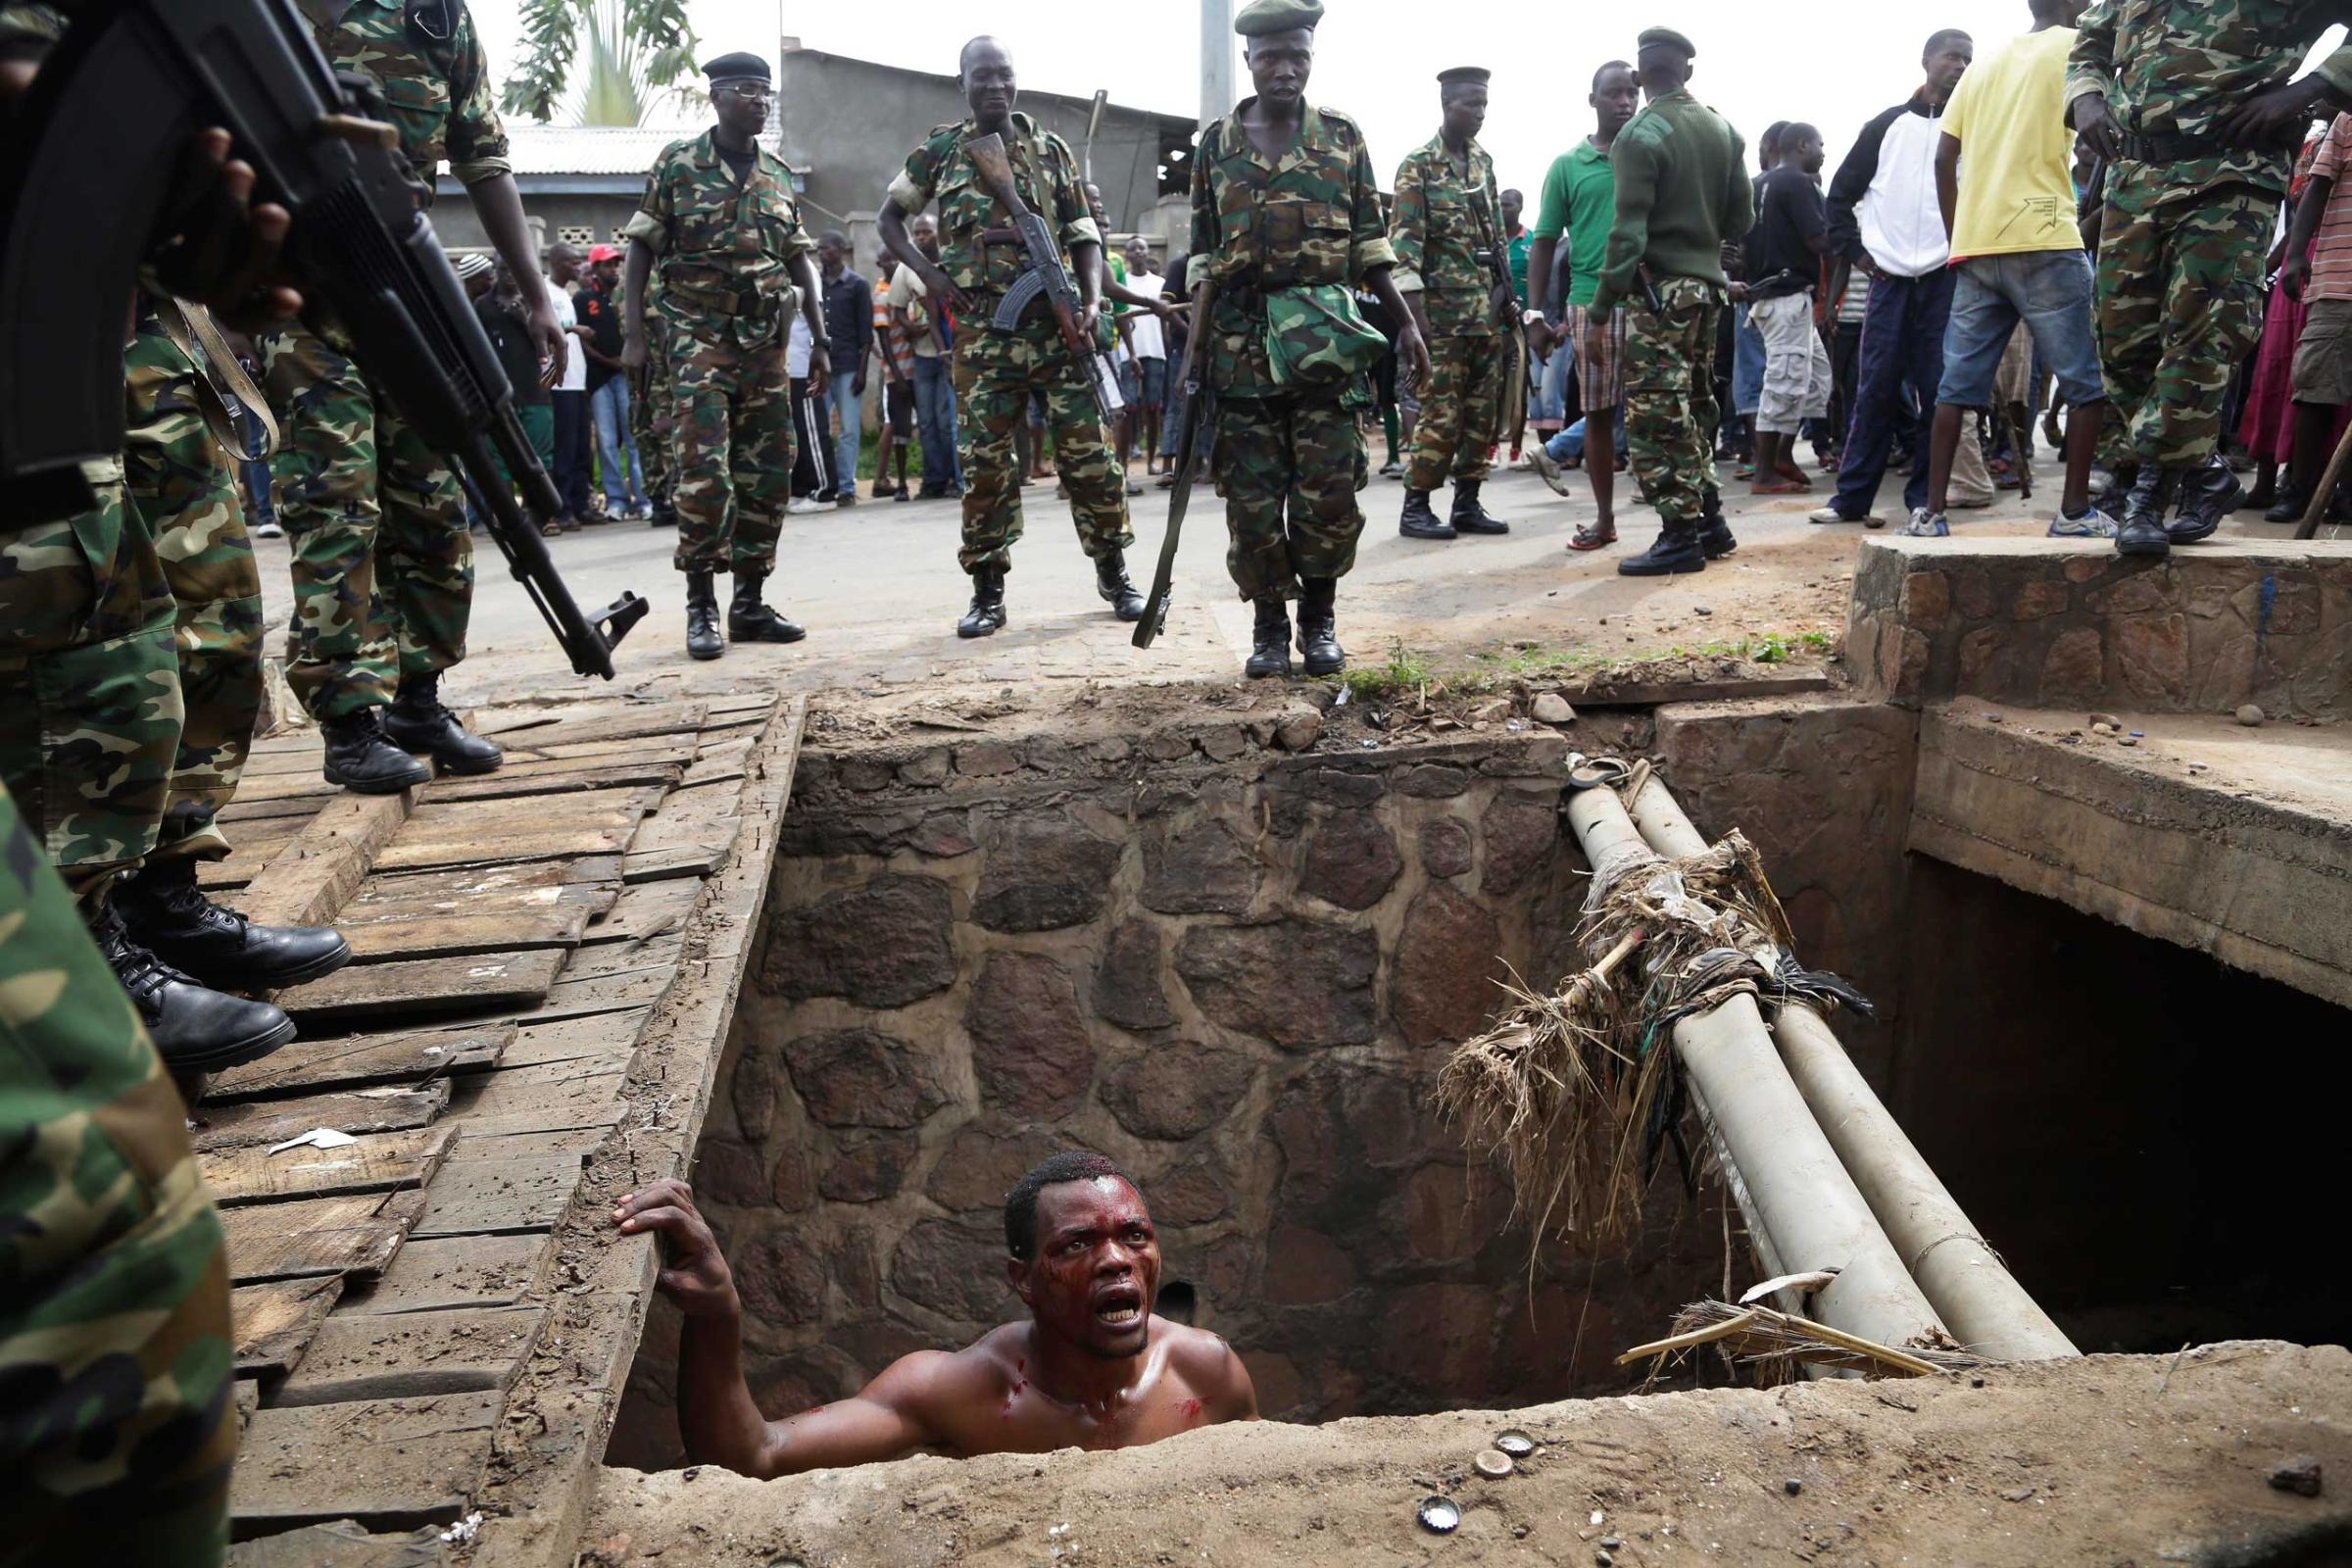 Niyonzima pleads with soldiers to protect him from a mob of demonstrators after he emerged from hiding in a sewer.